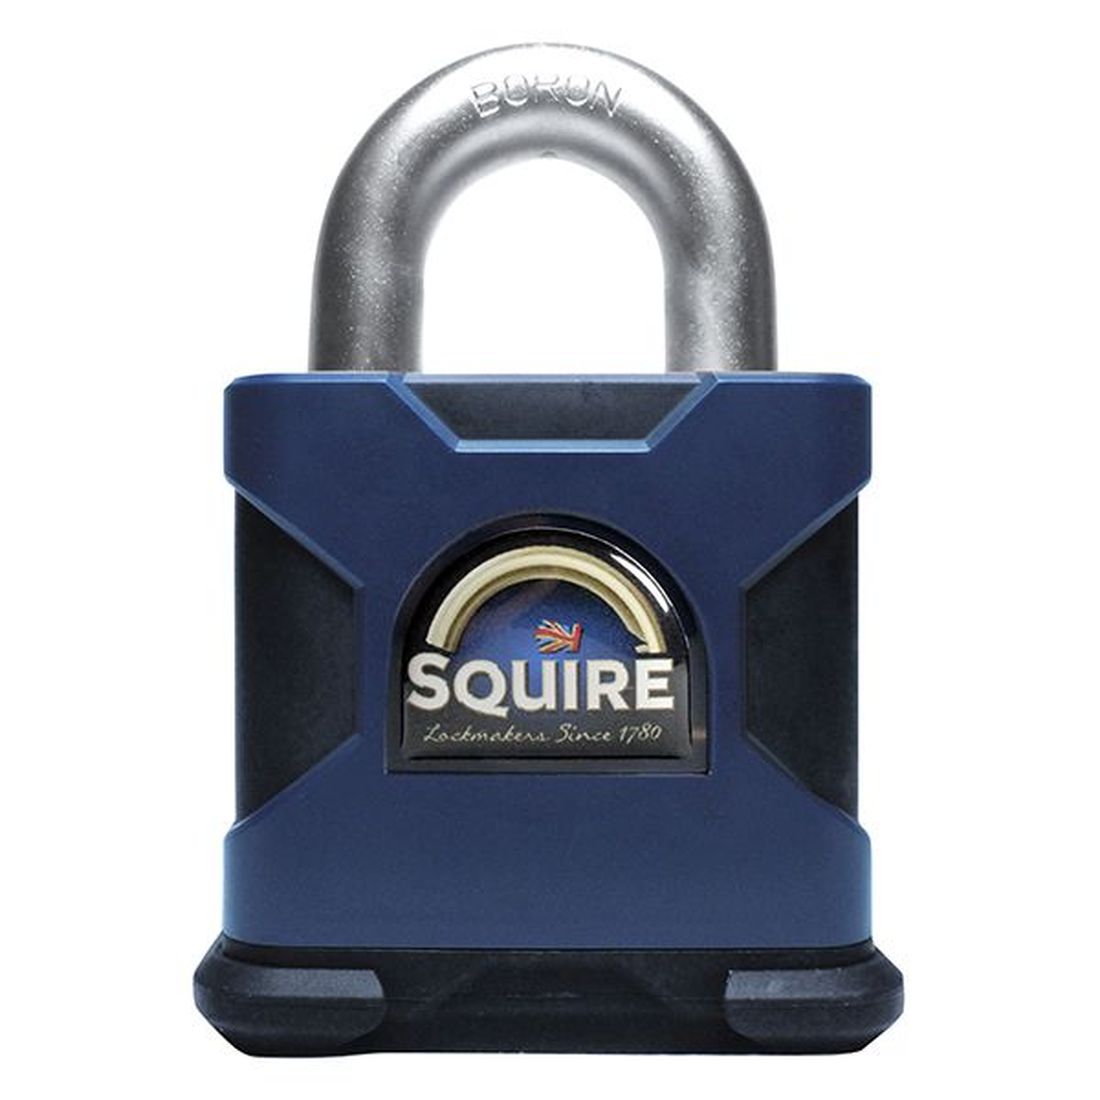 Squire SS80S Stronghold Solid Steel Padlock 80mm CEN6 Boxed                            